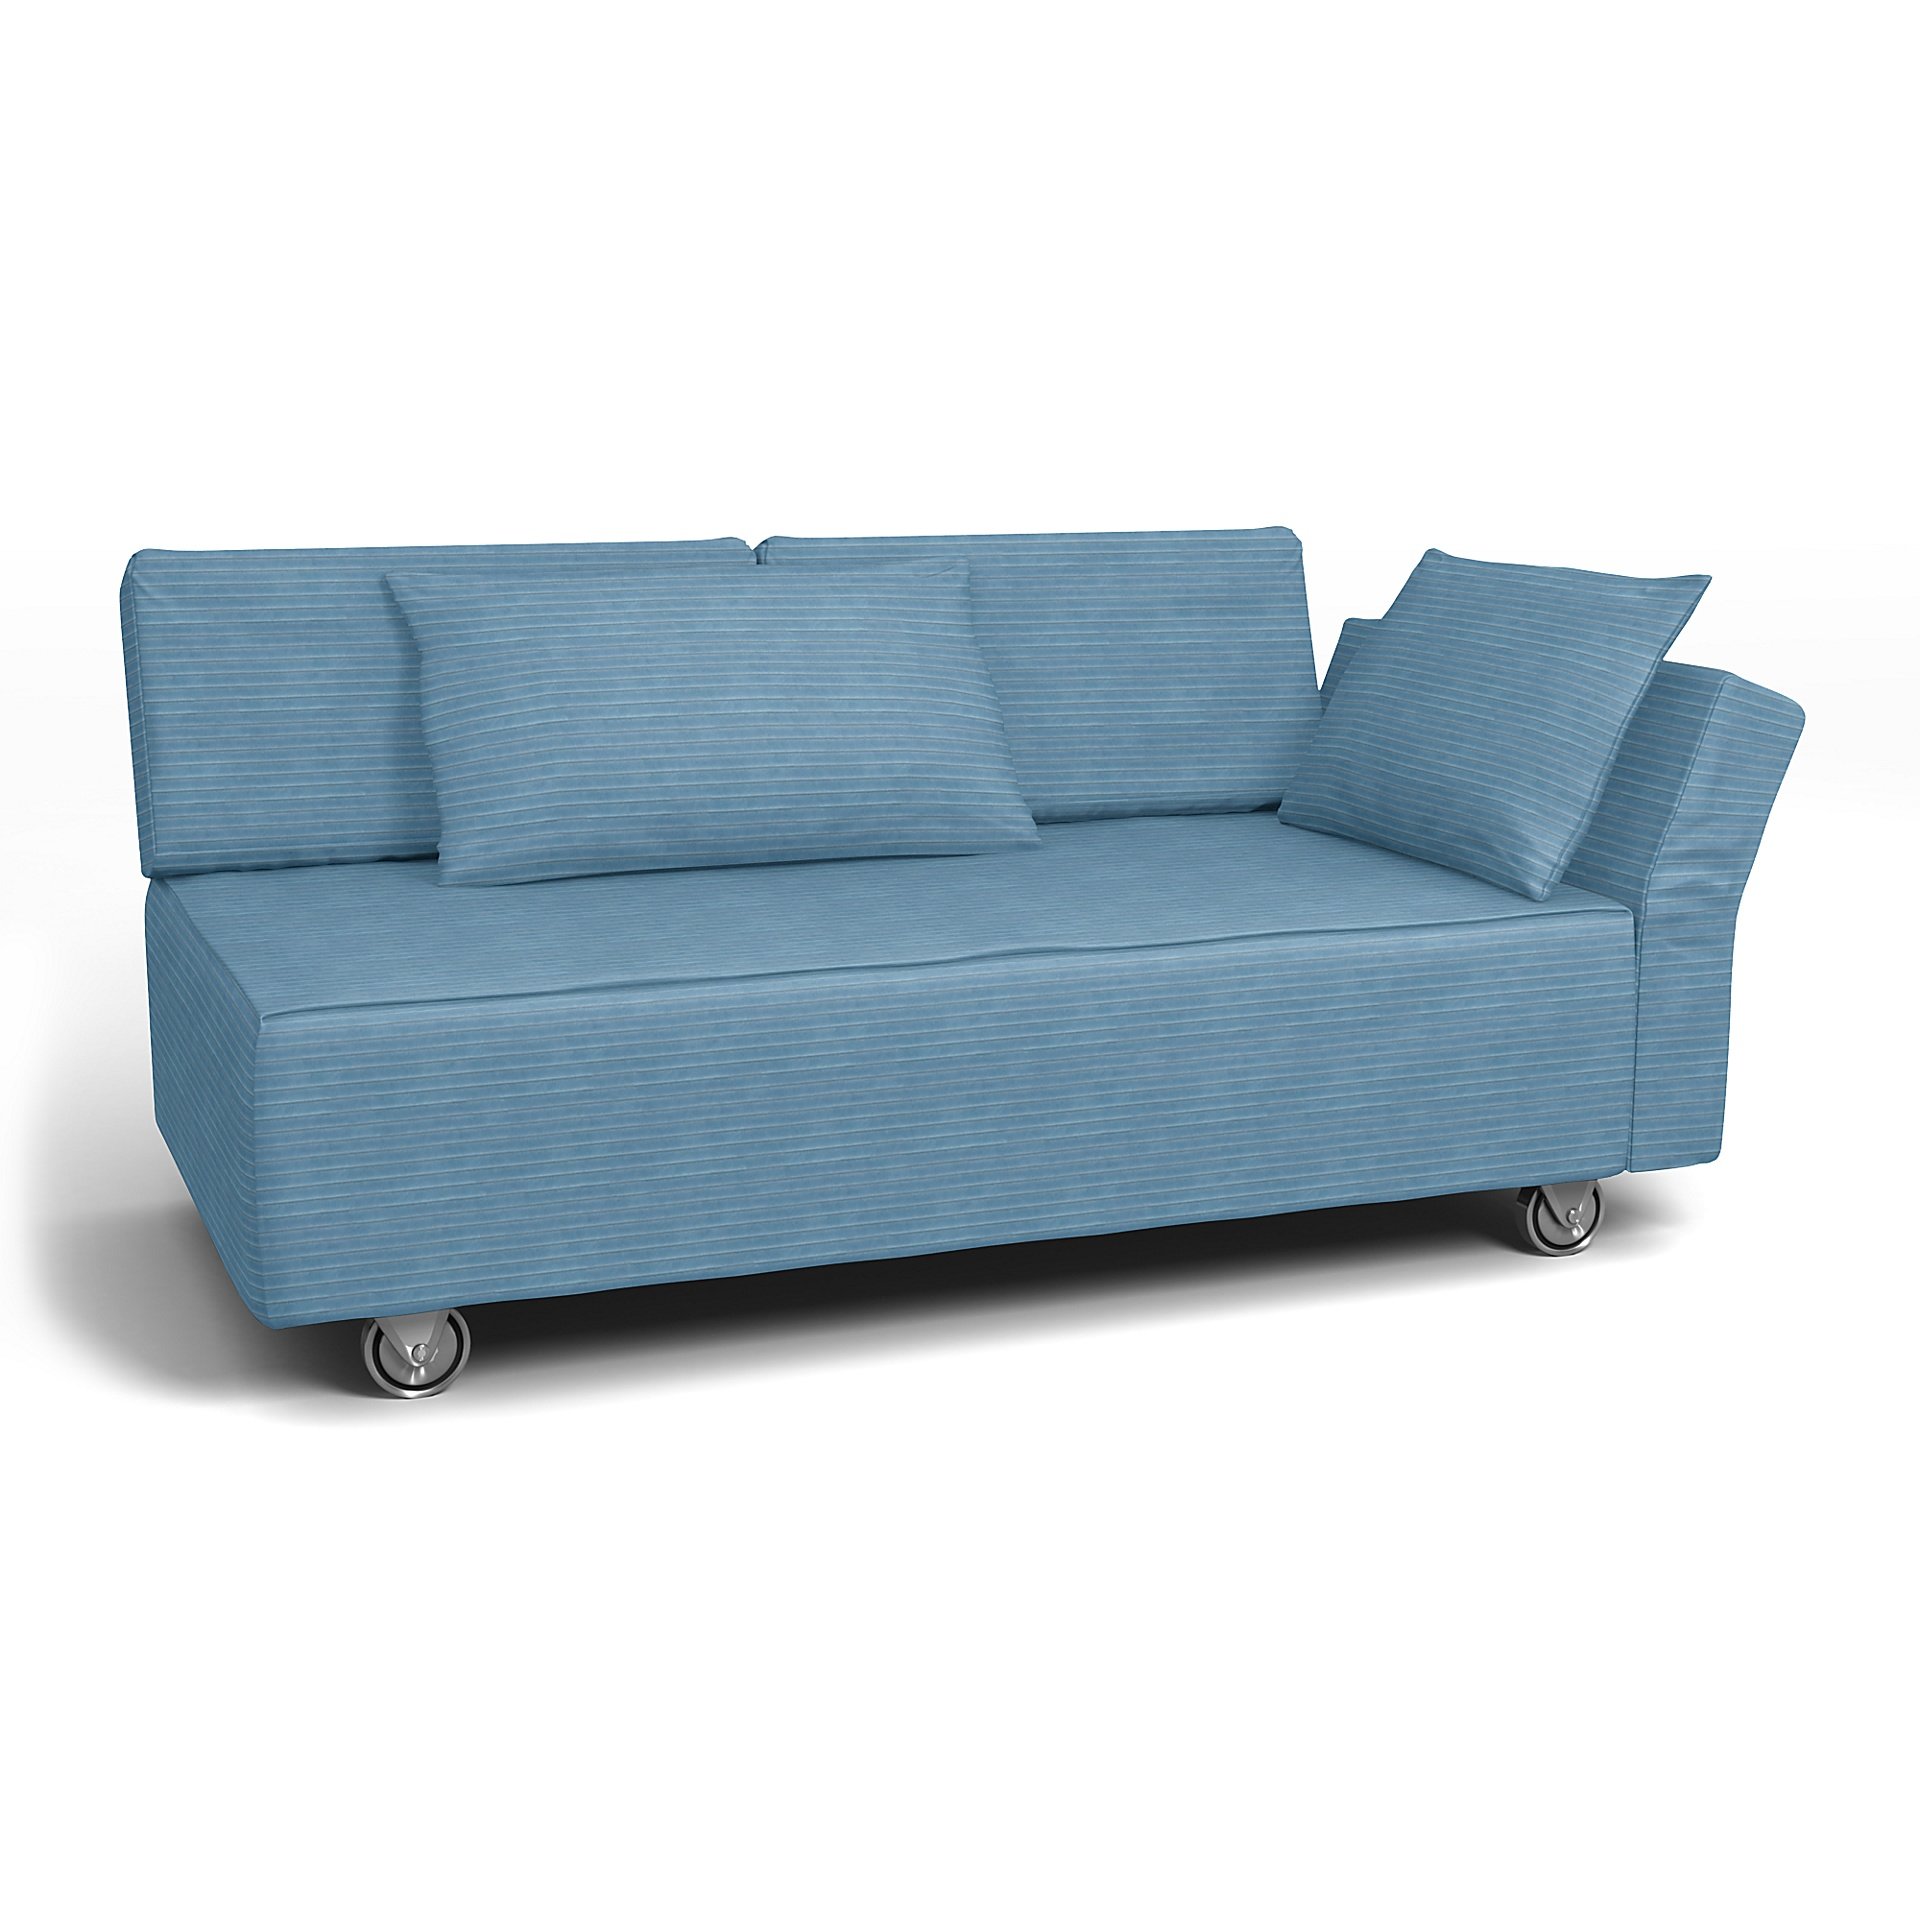 IKEA - Falsterbo 2 Seat Sofa with Right Arm Cover, Sky Blue, Corduroy - Bemz